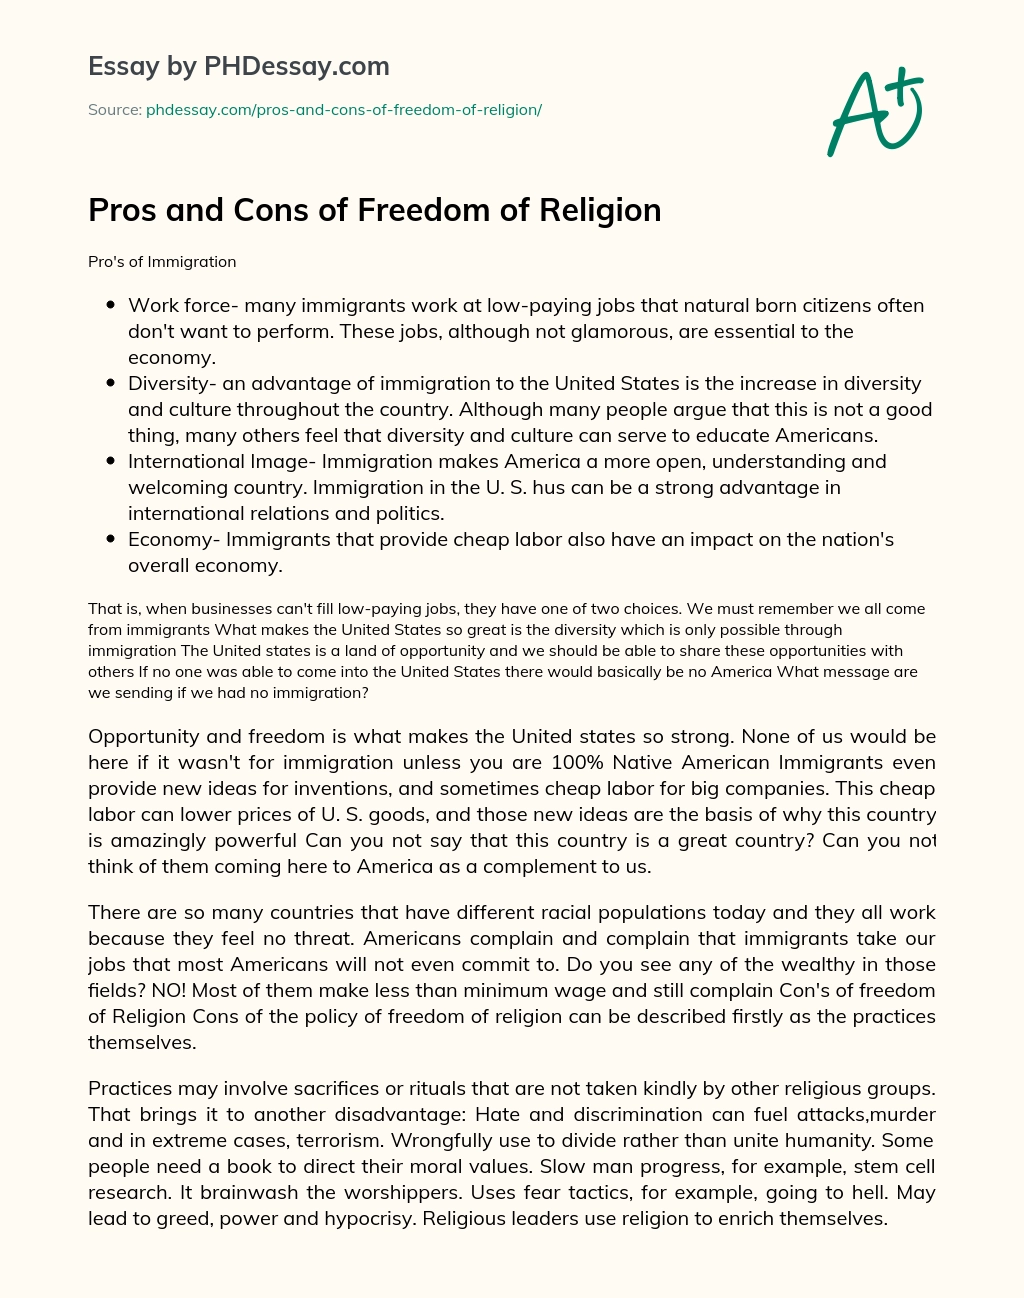 thesis statement about religious freedom